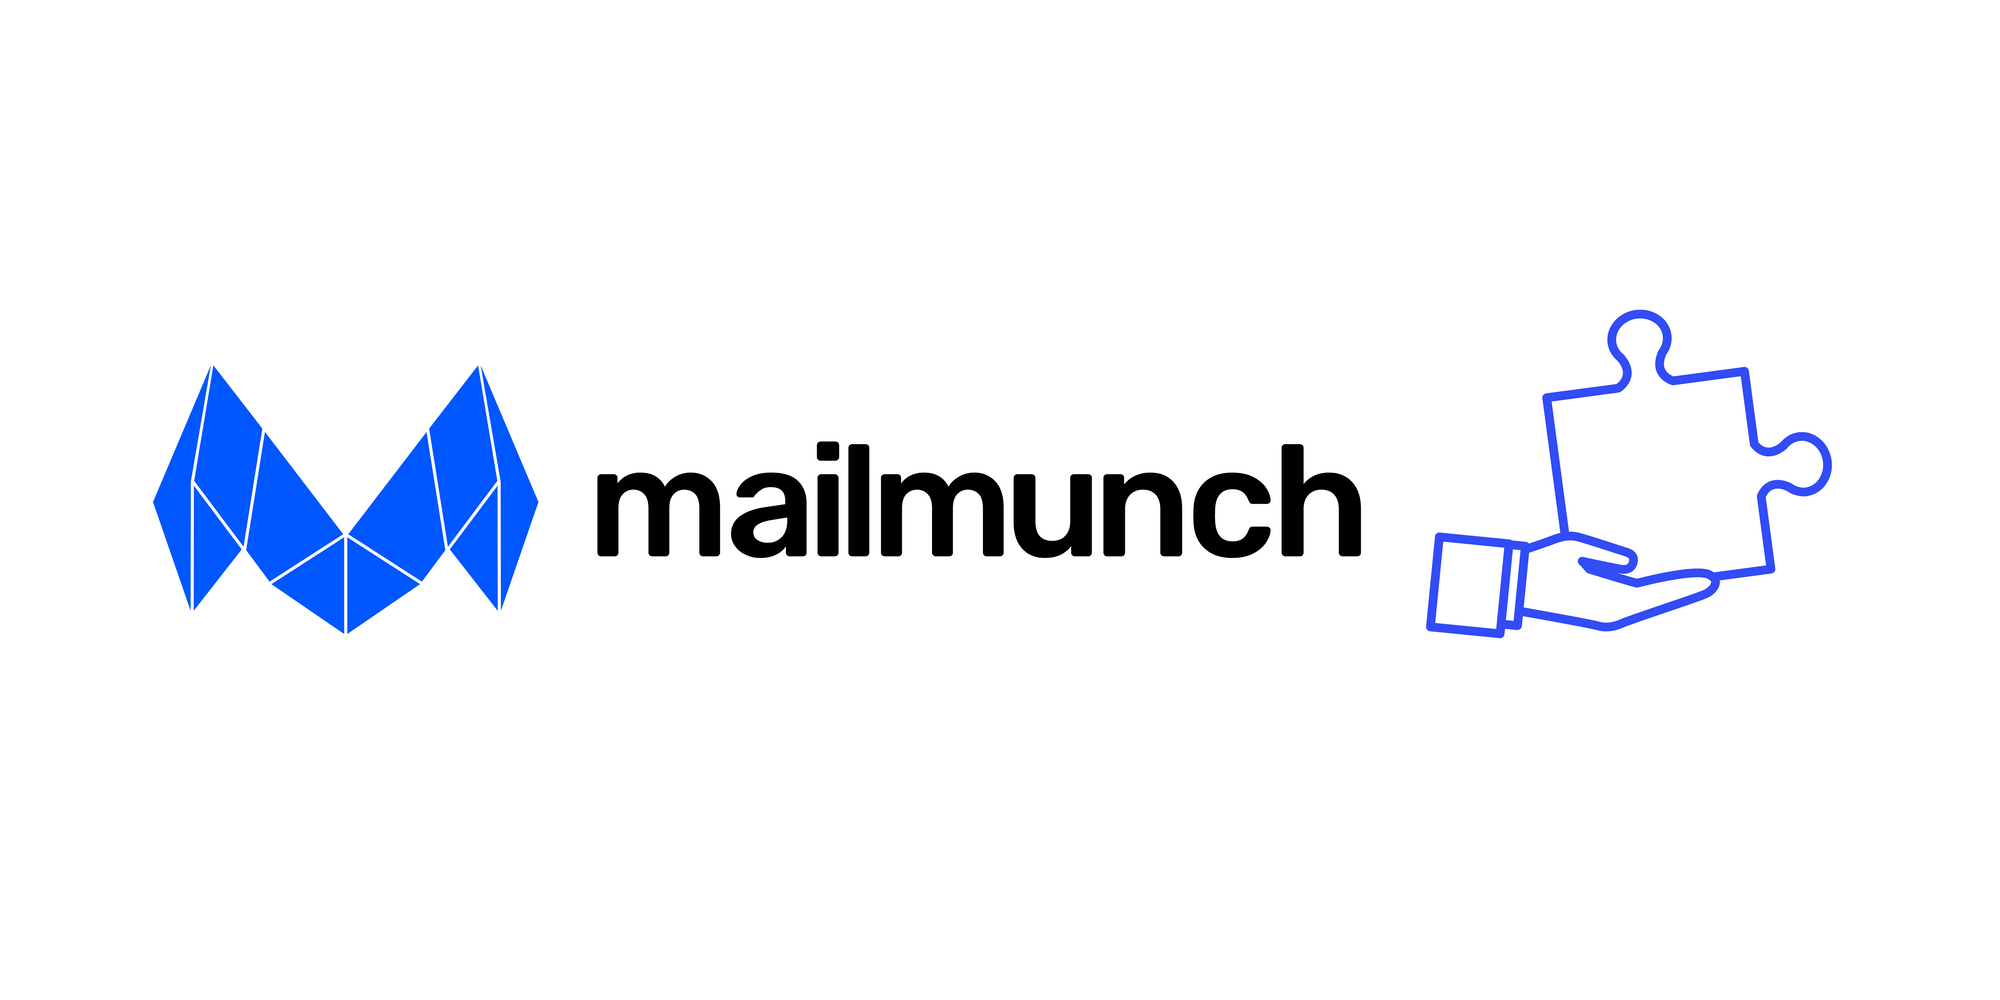 Mailmunch icon and a hand holding a jigsaw piece on white background